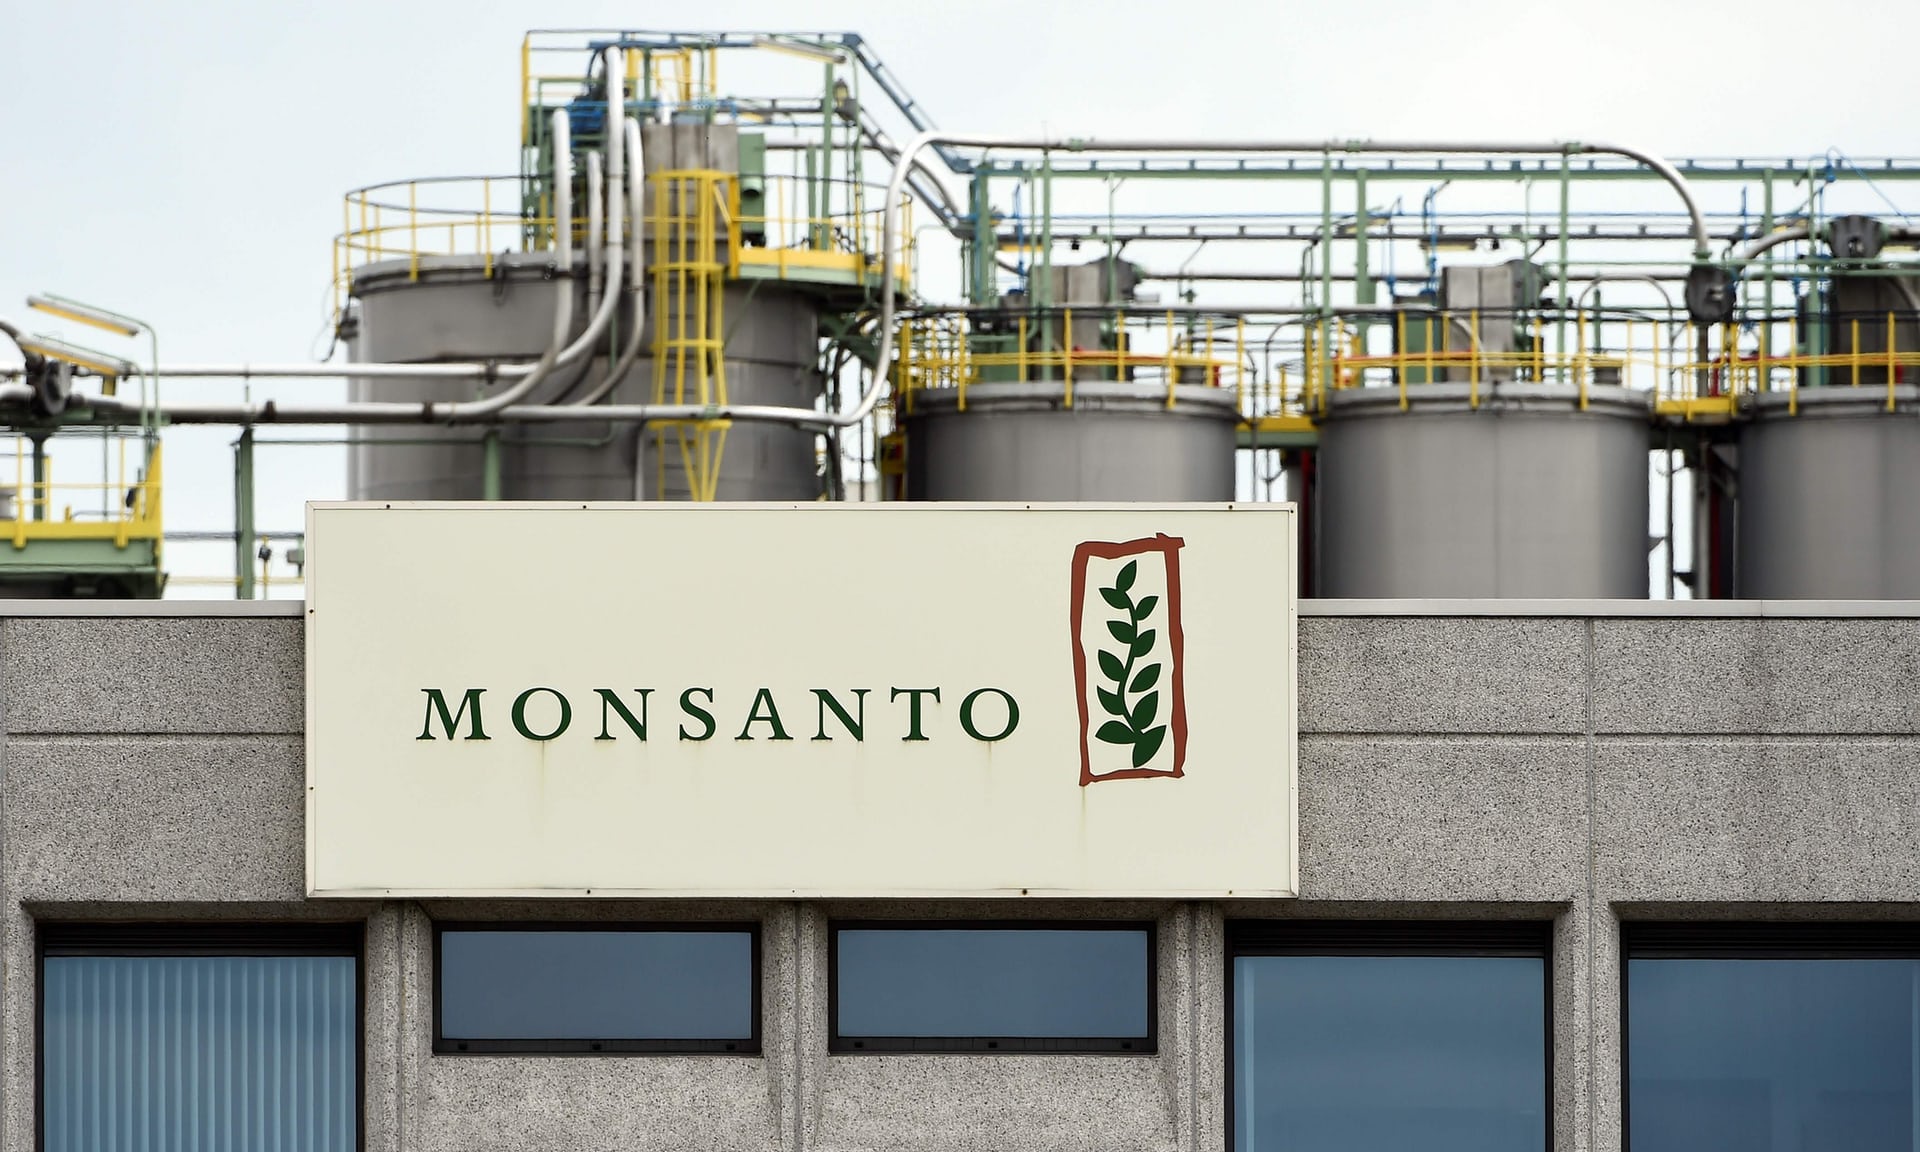 Monsanto sold banned chemicals for years despite known health risks, archives reveal